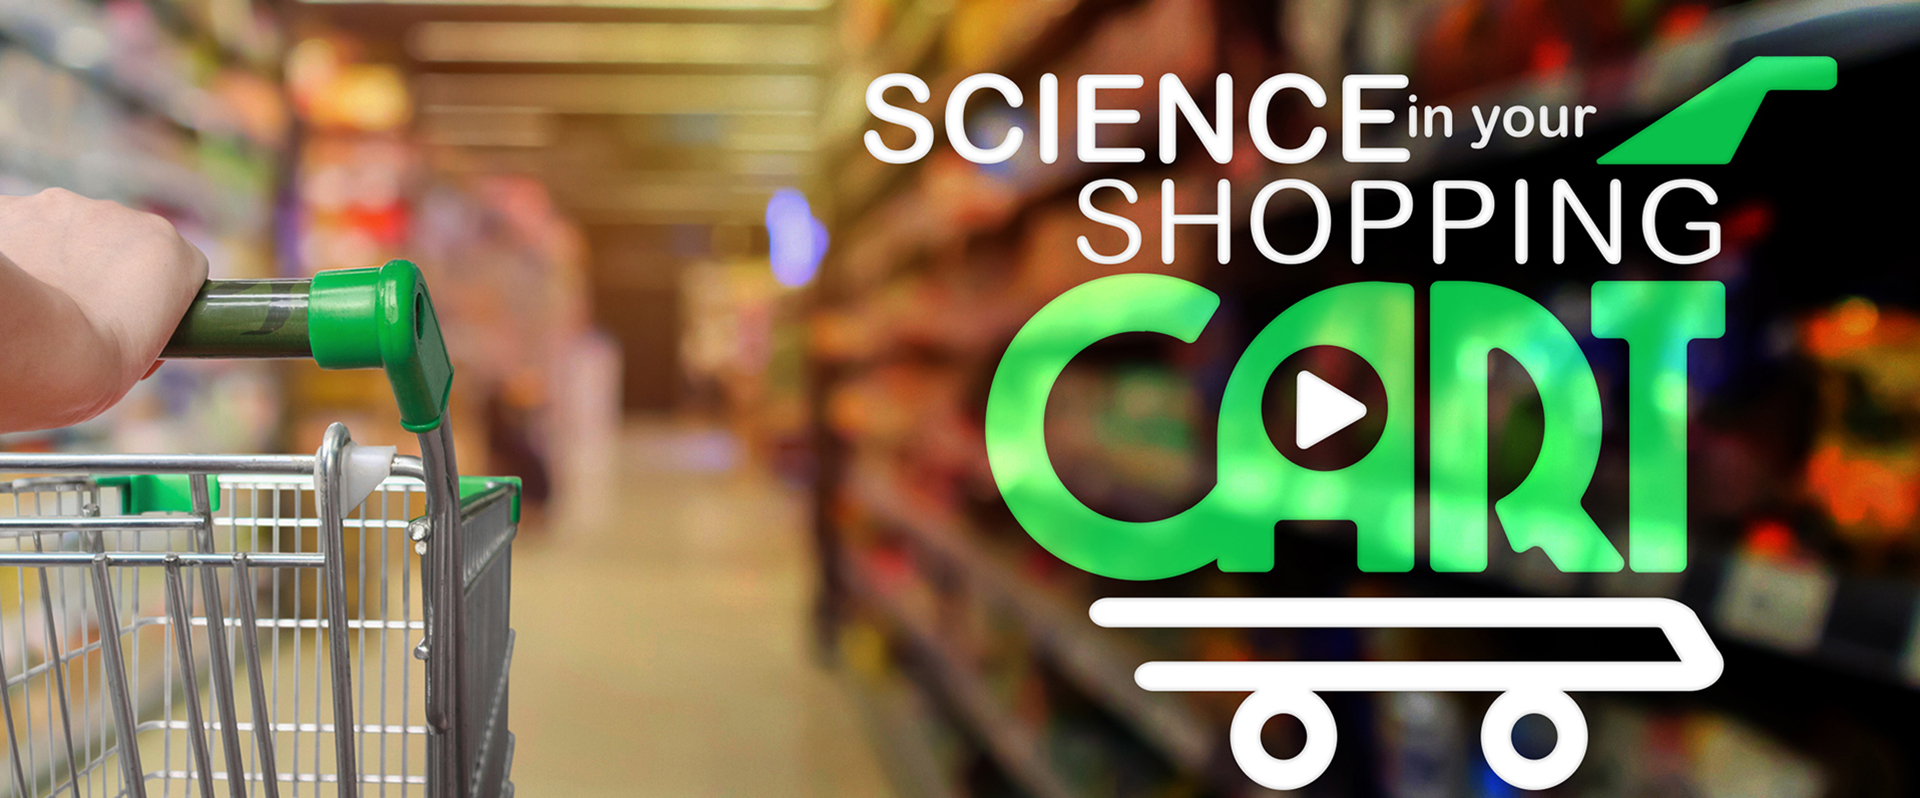 Illustration of a shopping cart overlaying a photo of a grocery store aisle with the text "Science in Your Shopping Cart"